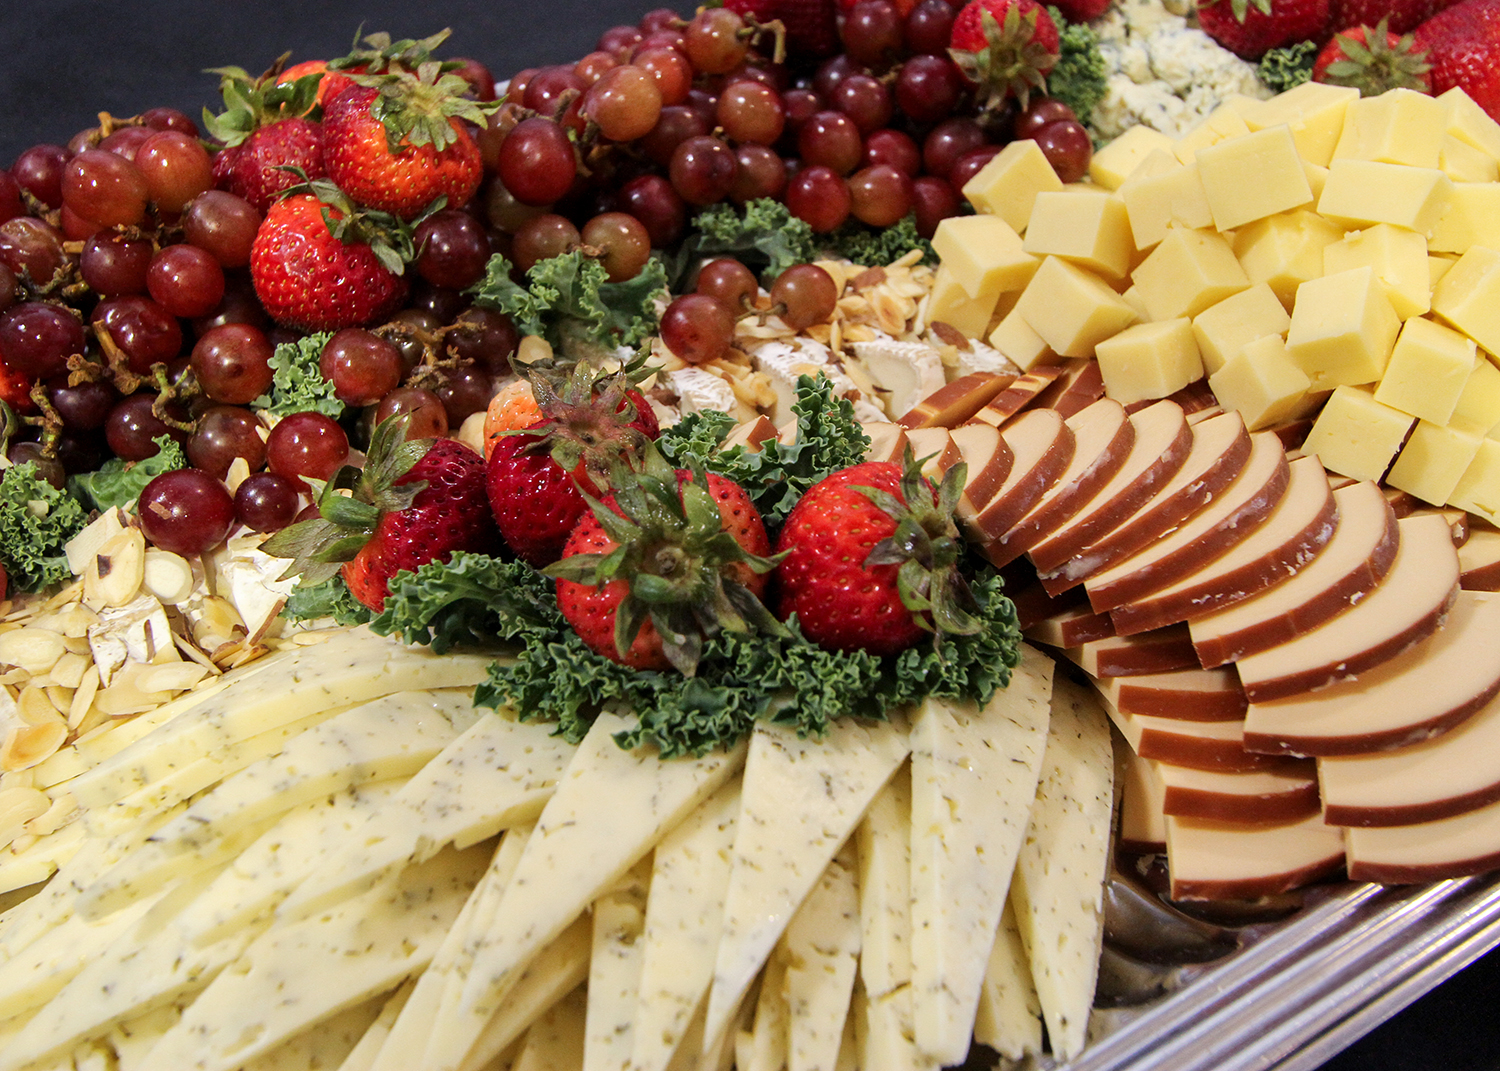 Imported Cheese Tray